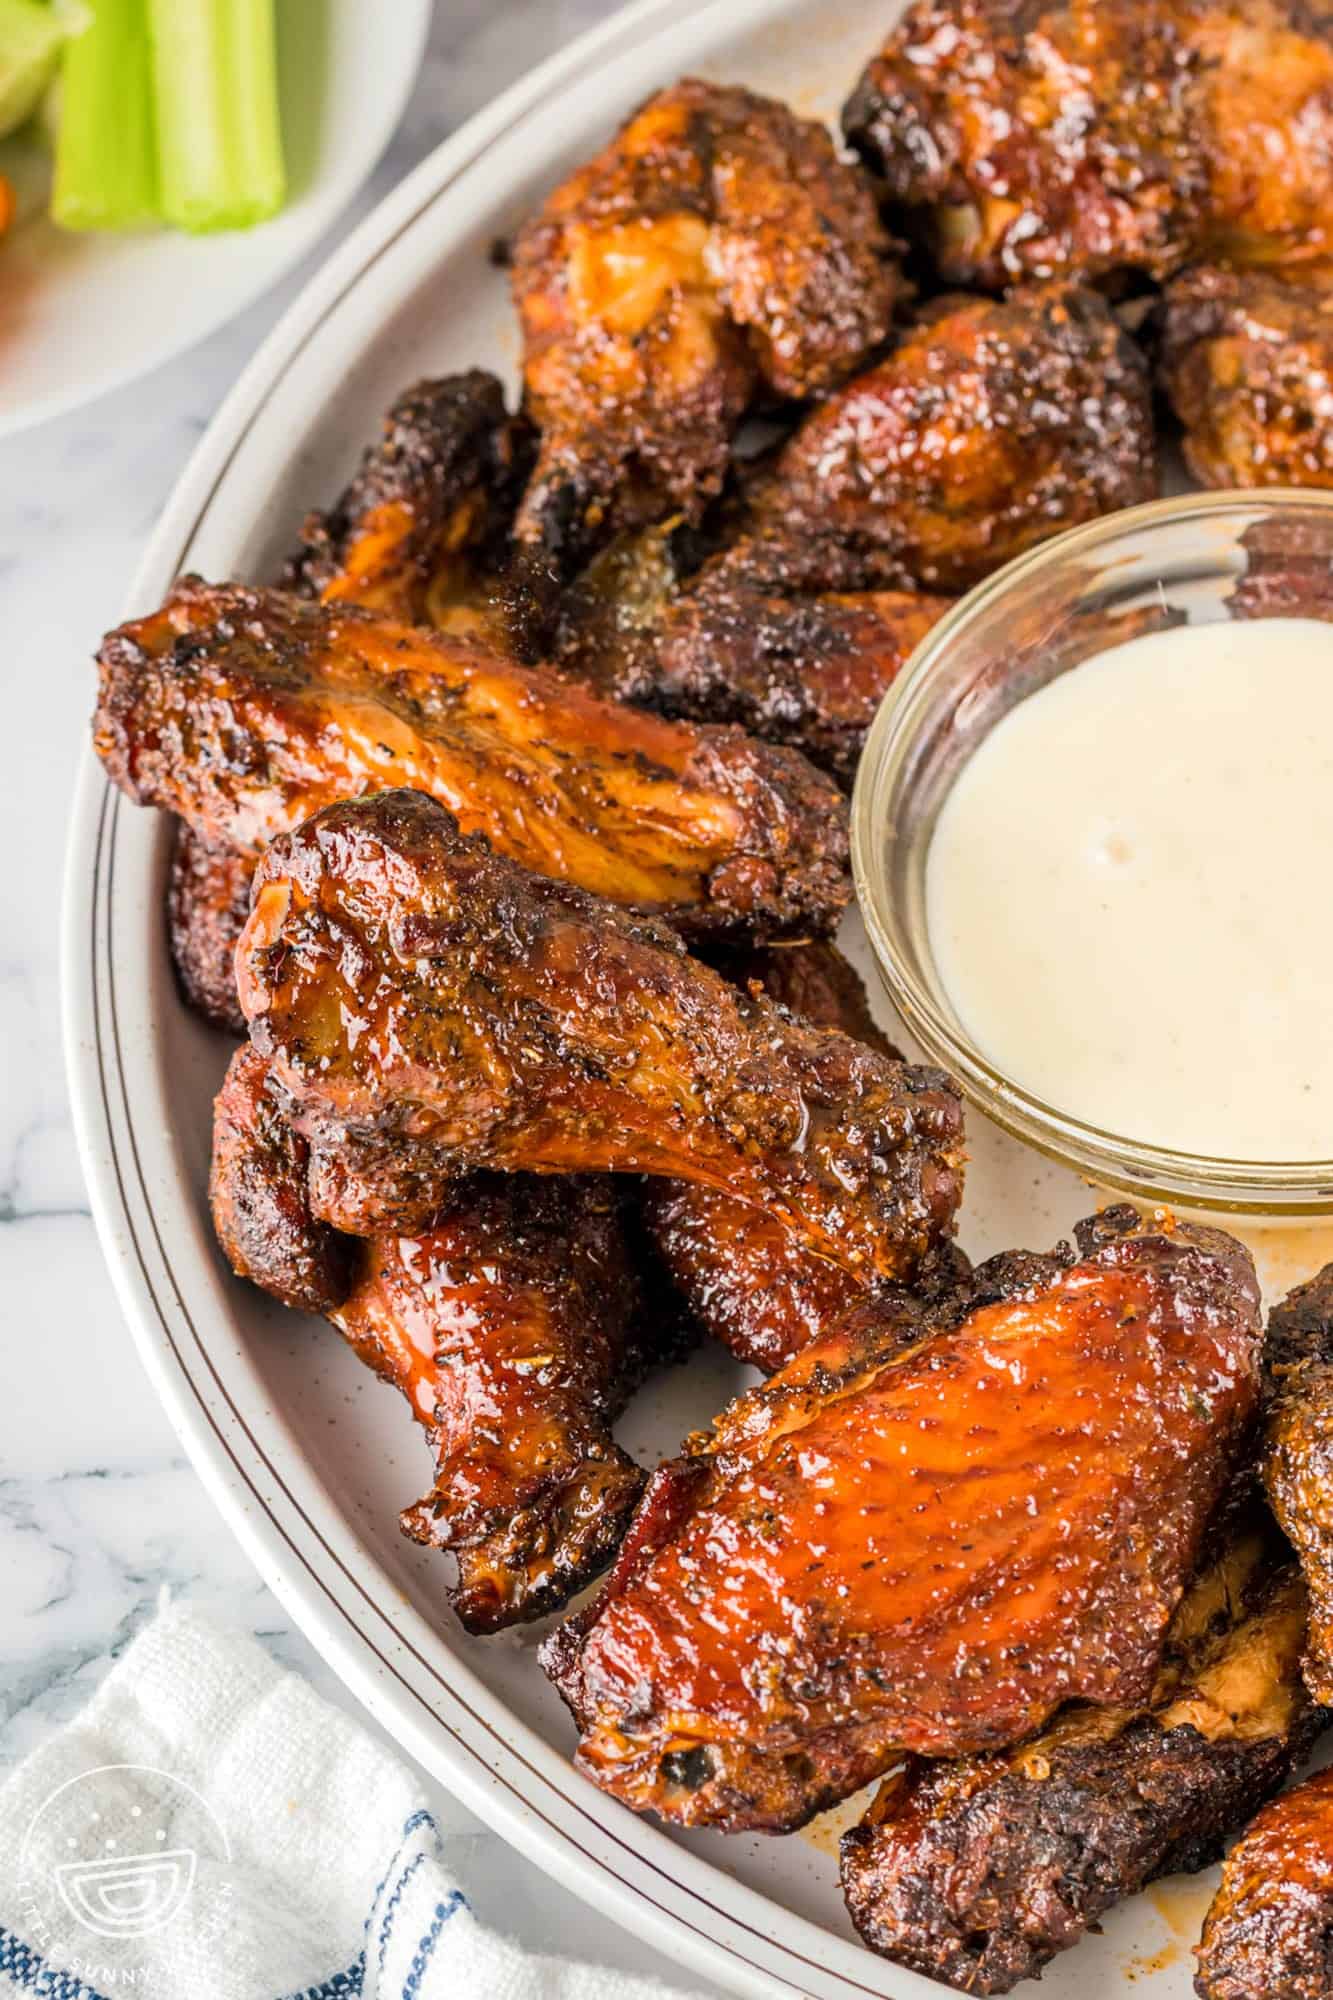 Smoked chicken wings served on a white plate with a small dip with ranch sauce